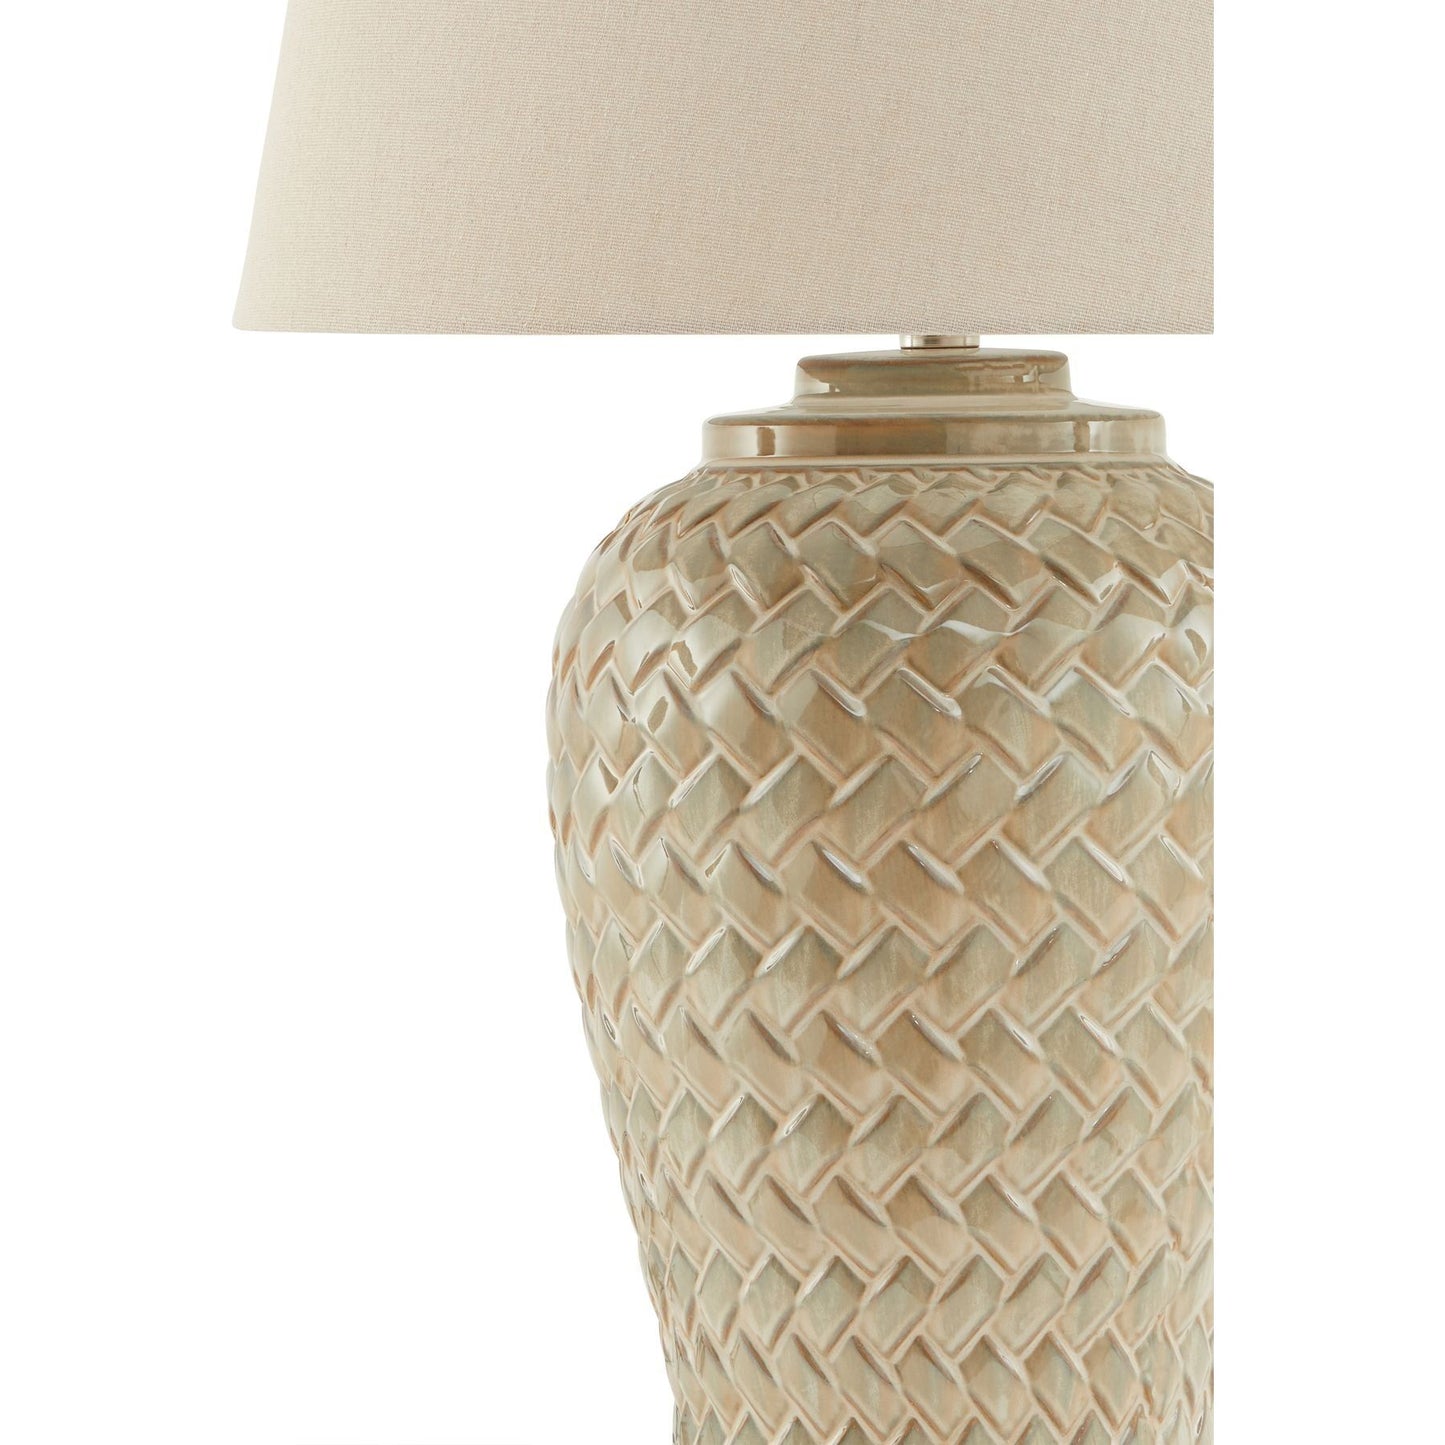 Woven Ceramic Table Lamp With Linen Shade - Ashton and Finch